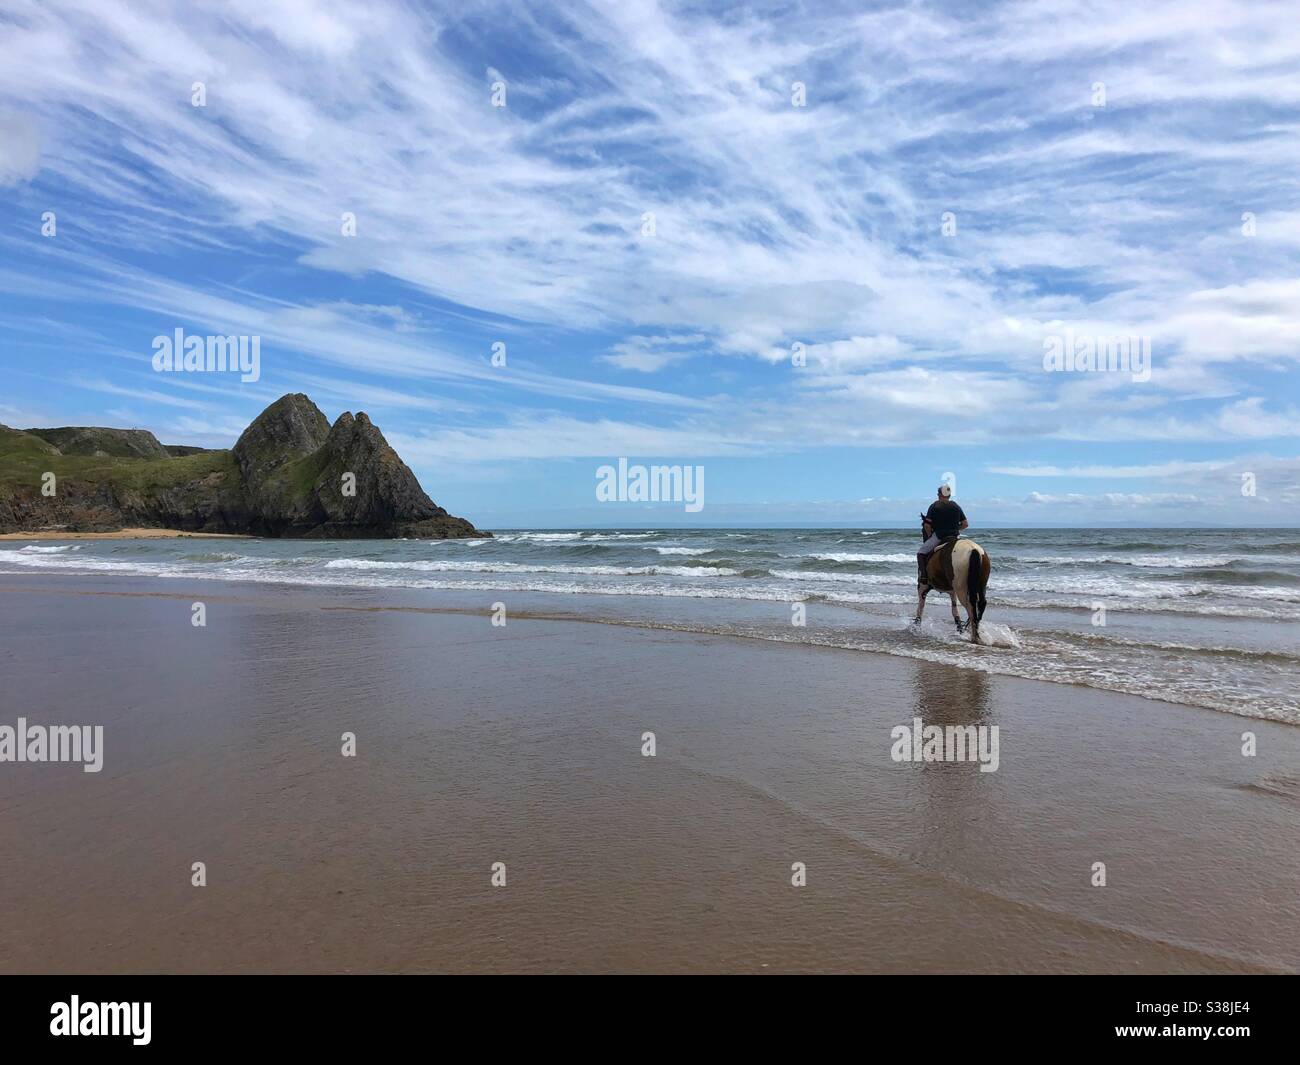 A lone male horse rider in the sea at Three Cliffs Bay, Gower, Swansea, Wales, August. Stock Photo